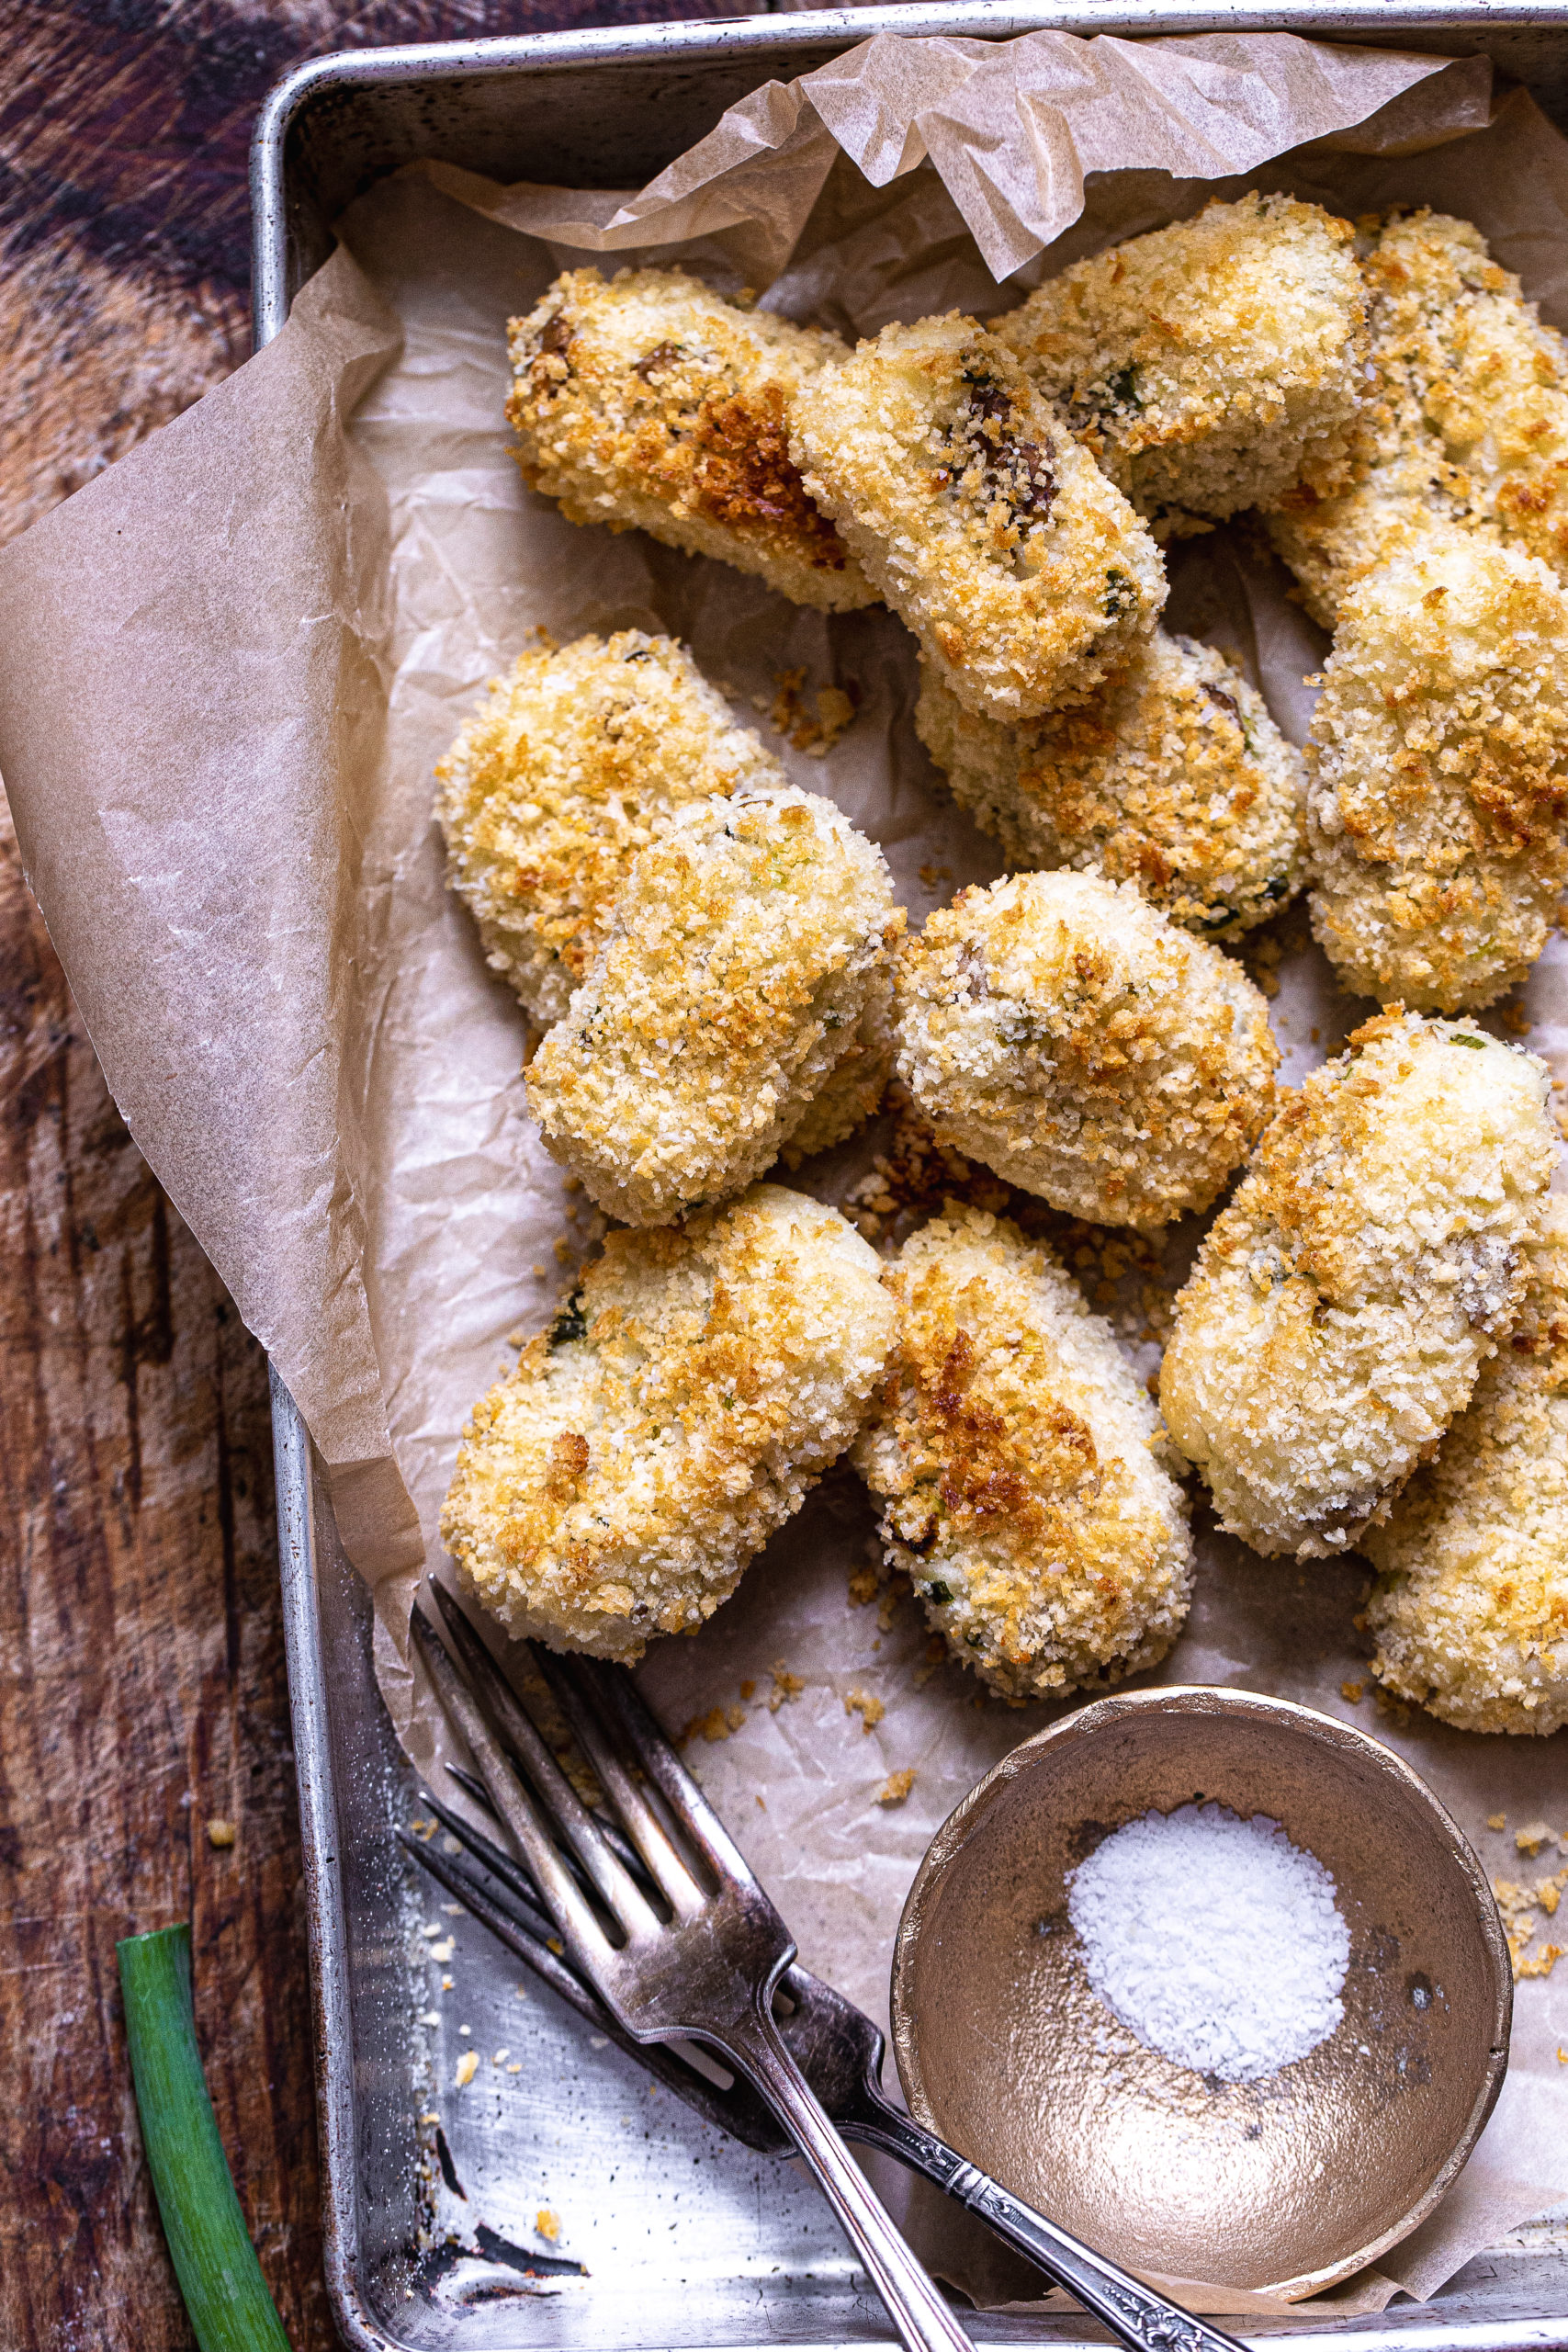 Healthy Baked Tater Tots (Sour Cream and Onion!)